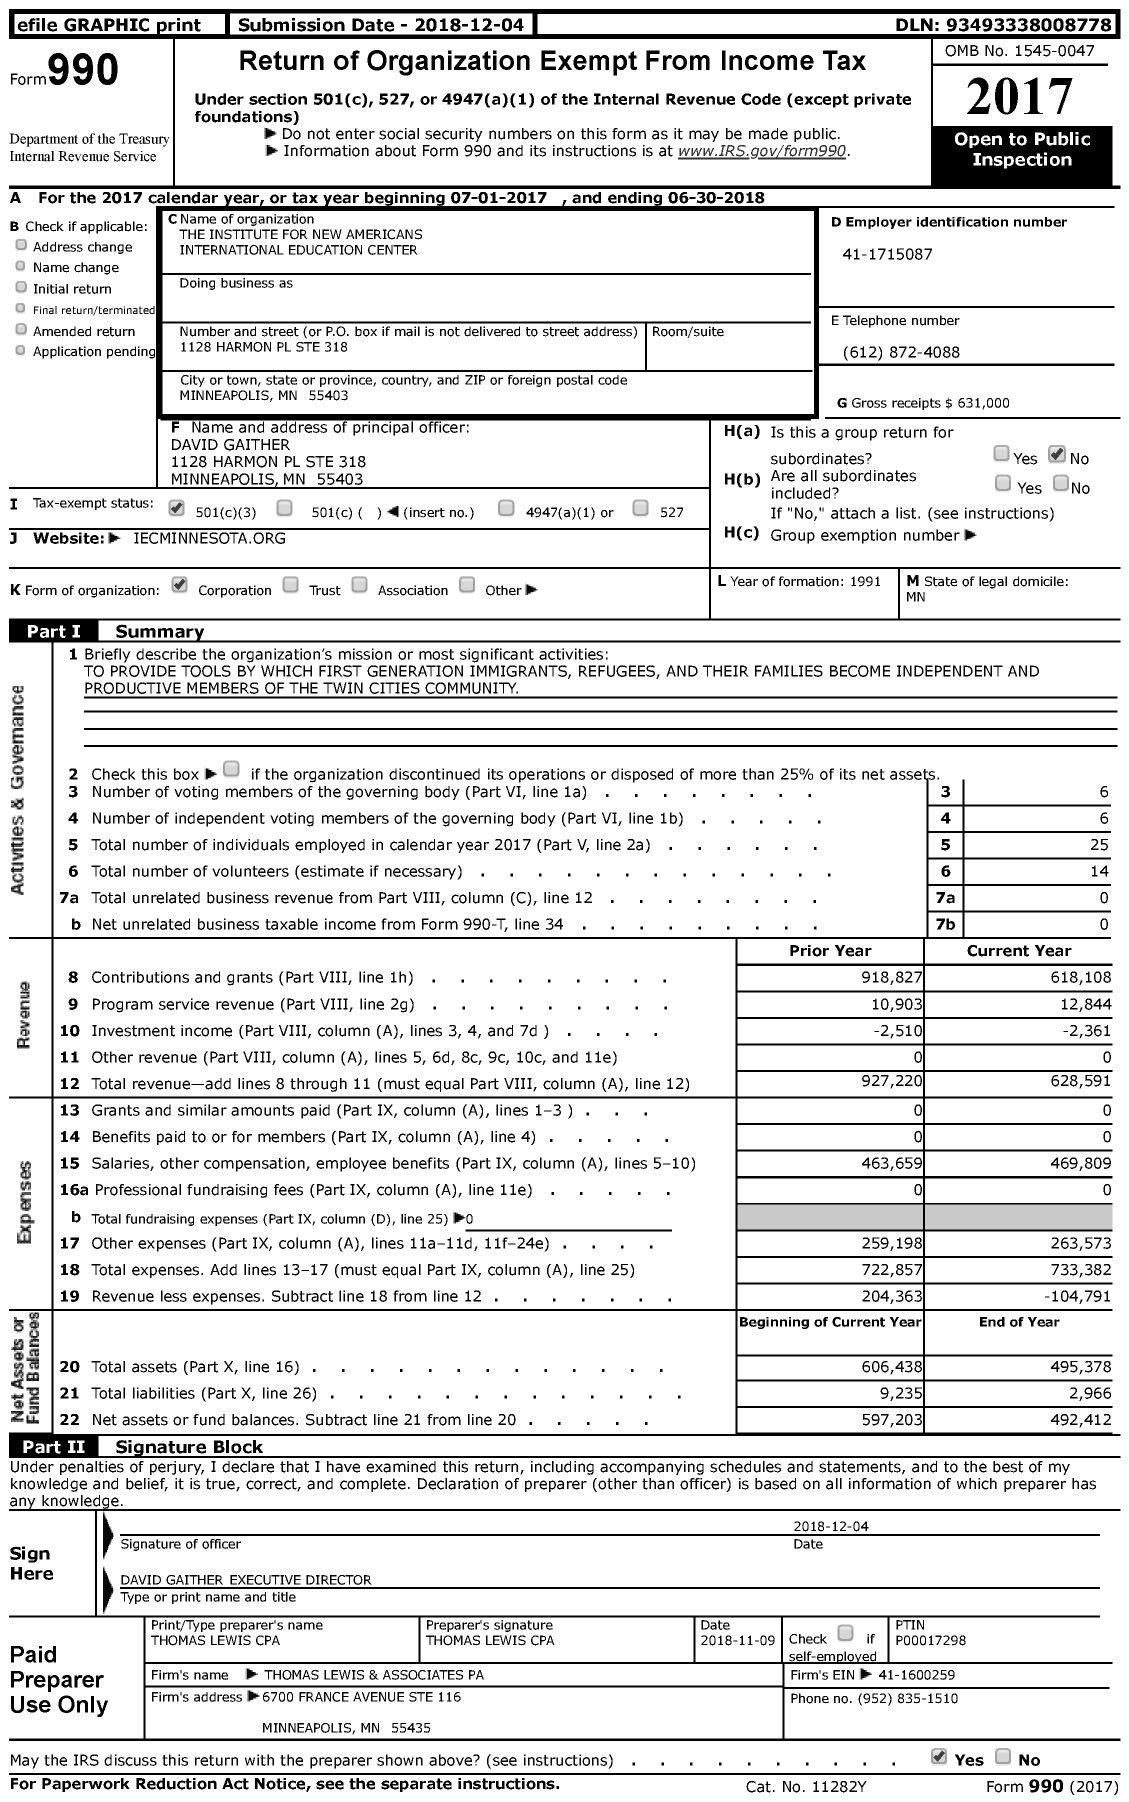 Image of first page of 2017 Form 990 for The Institute for New Americans International Education Center